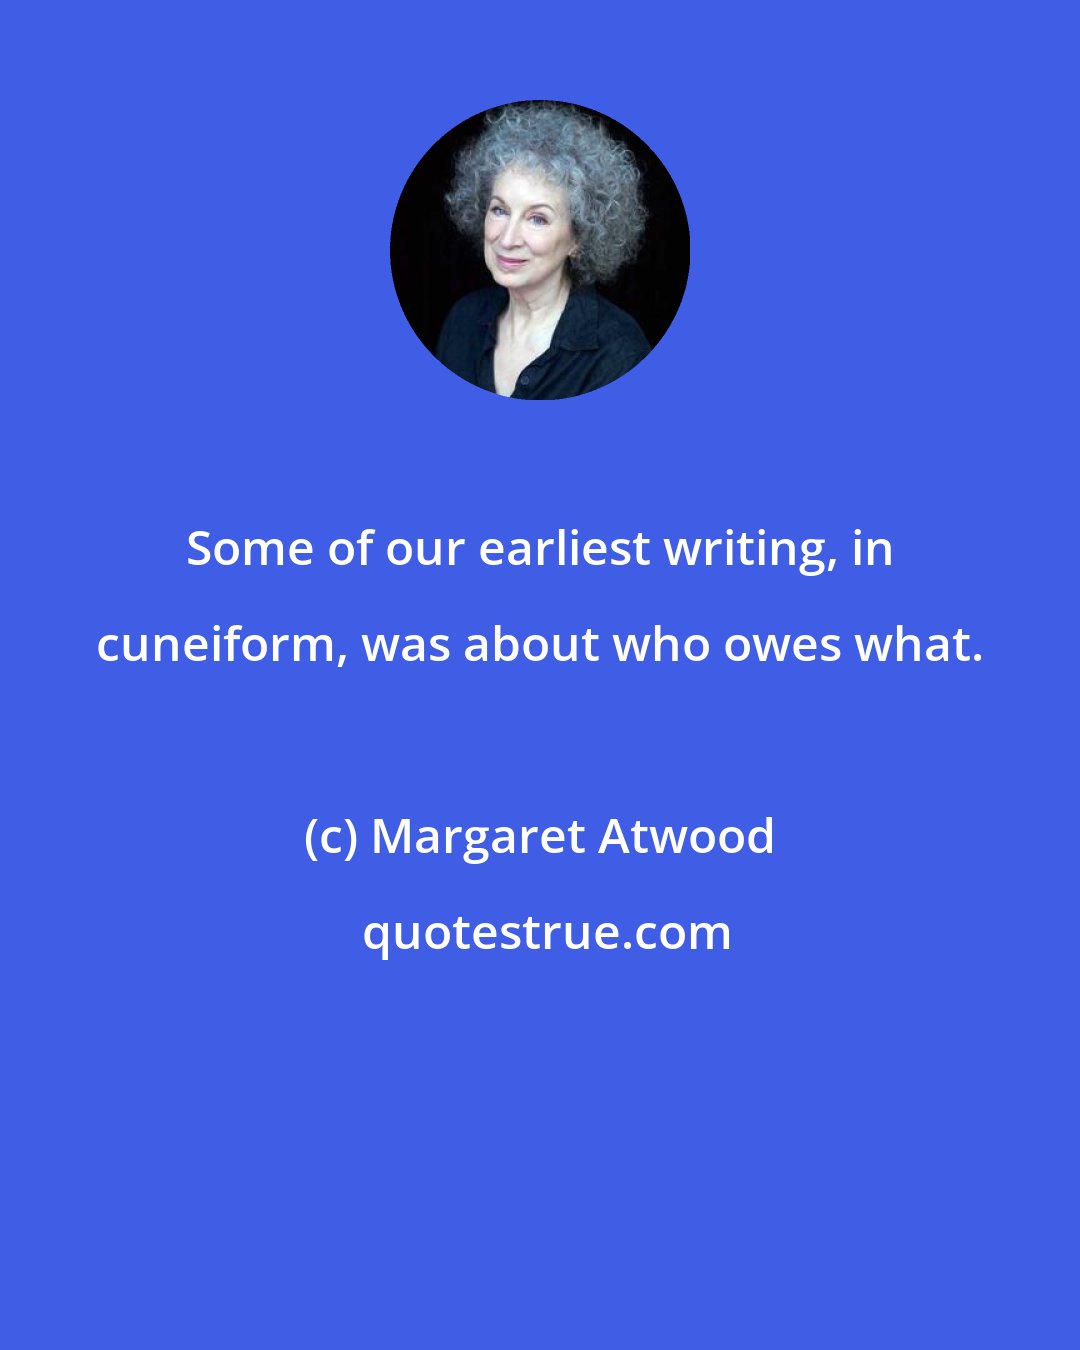 Margaret Atwood: Some of our earliest writing, in cuneiform, was about who owes what.